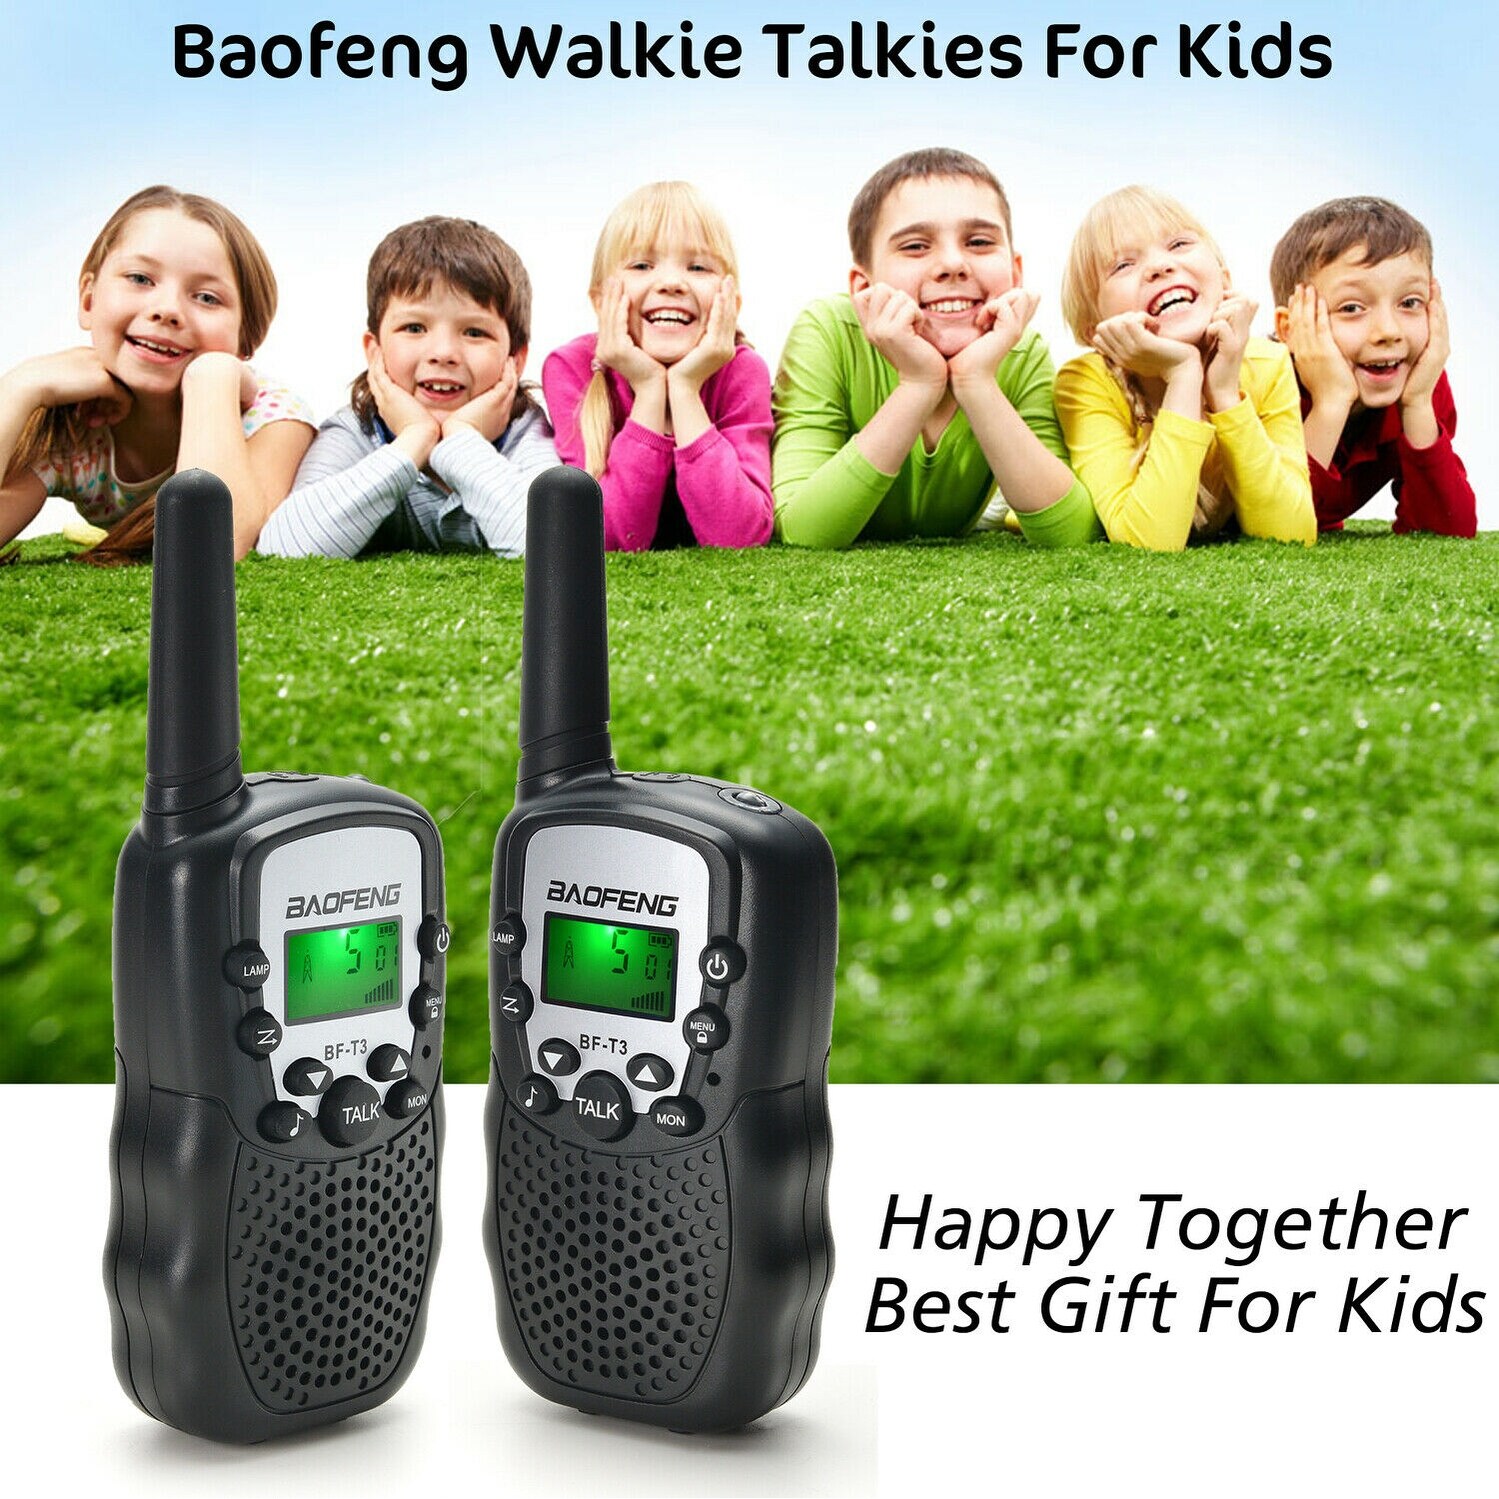 Baofeng Walkie Talkies 22 Channels 2 Way Radio 3 Miles (Up to 5 Miles)  FRS/GMRS Toy for Kids 2 Pack 